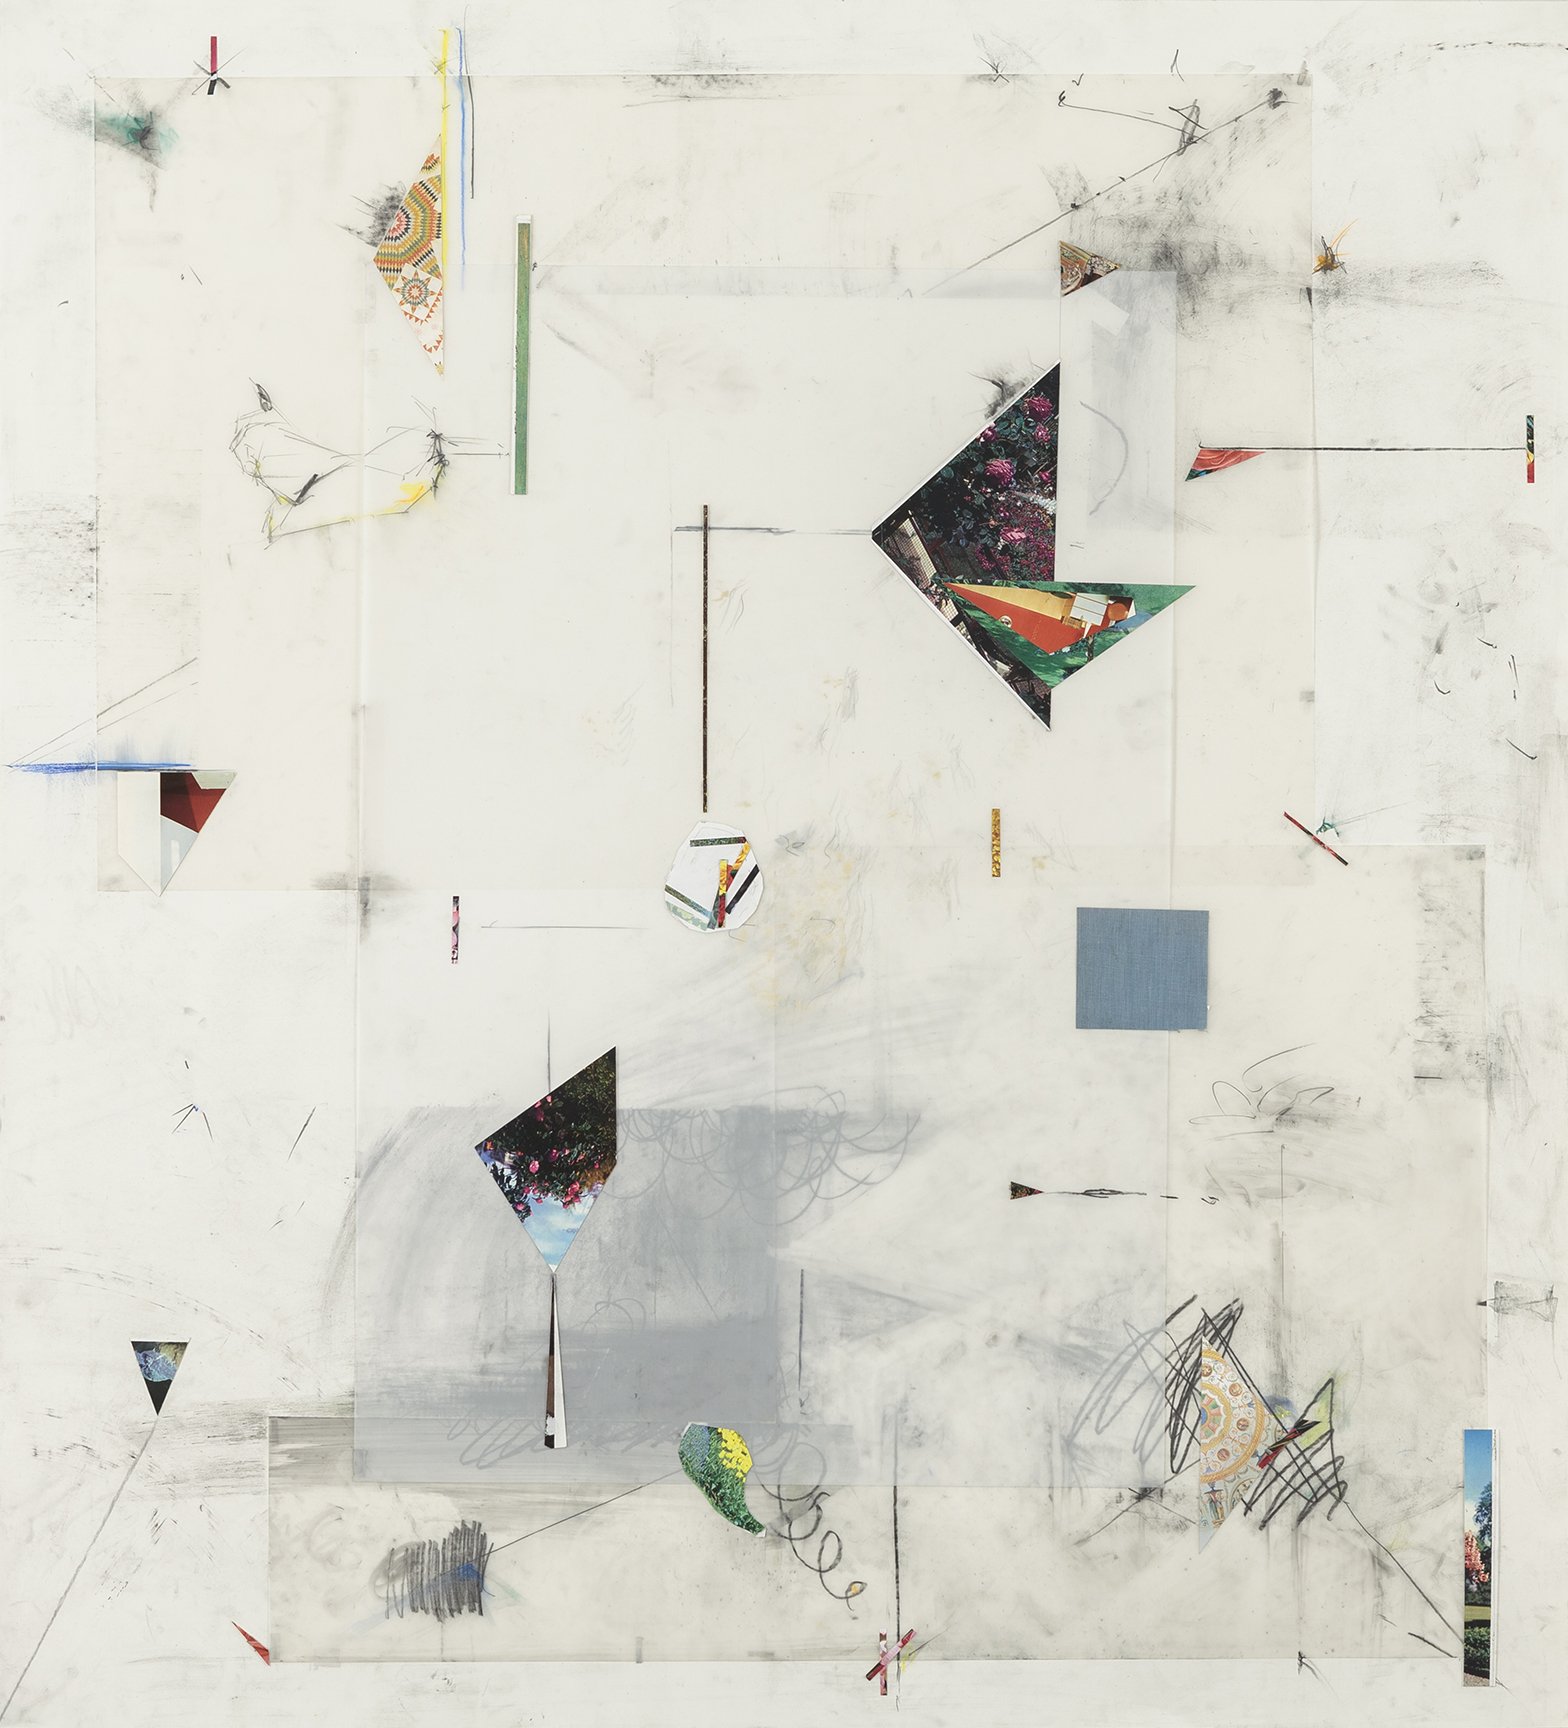 Javier_Romero-16_Garden_Floor_Plan_6_2013_Graphite_colored_pencil_pastels_and_collage_on_paper_